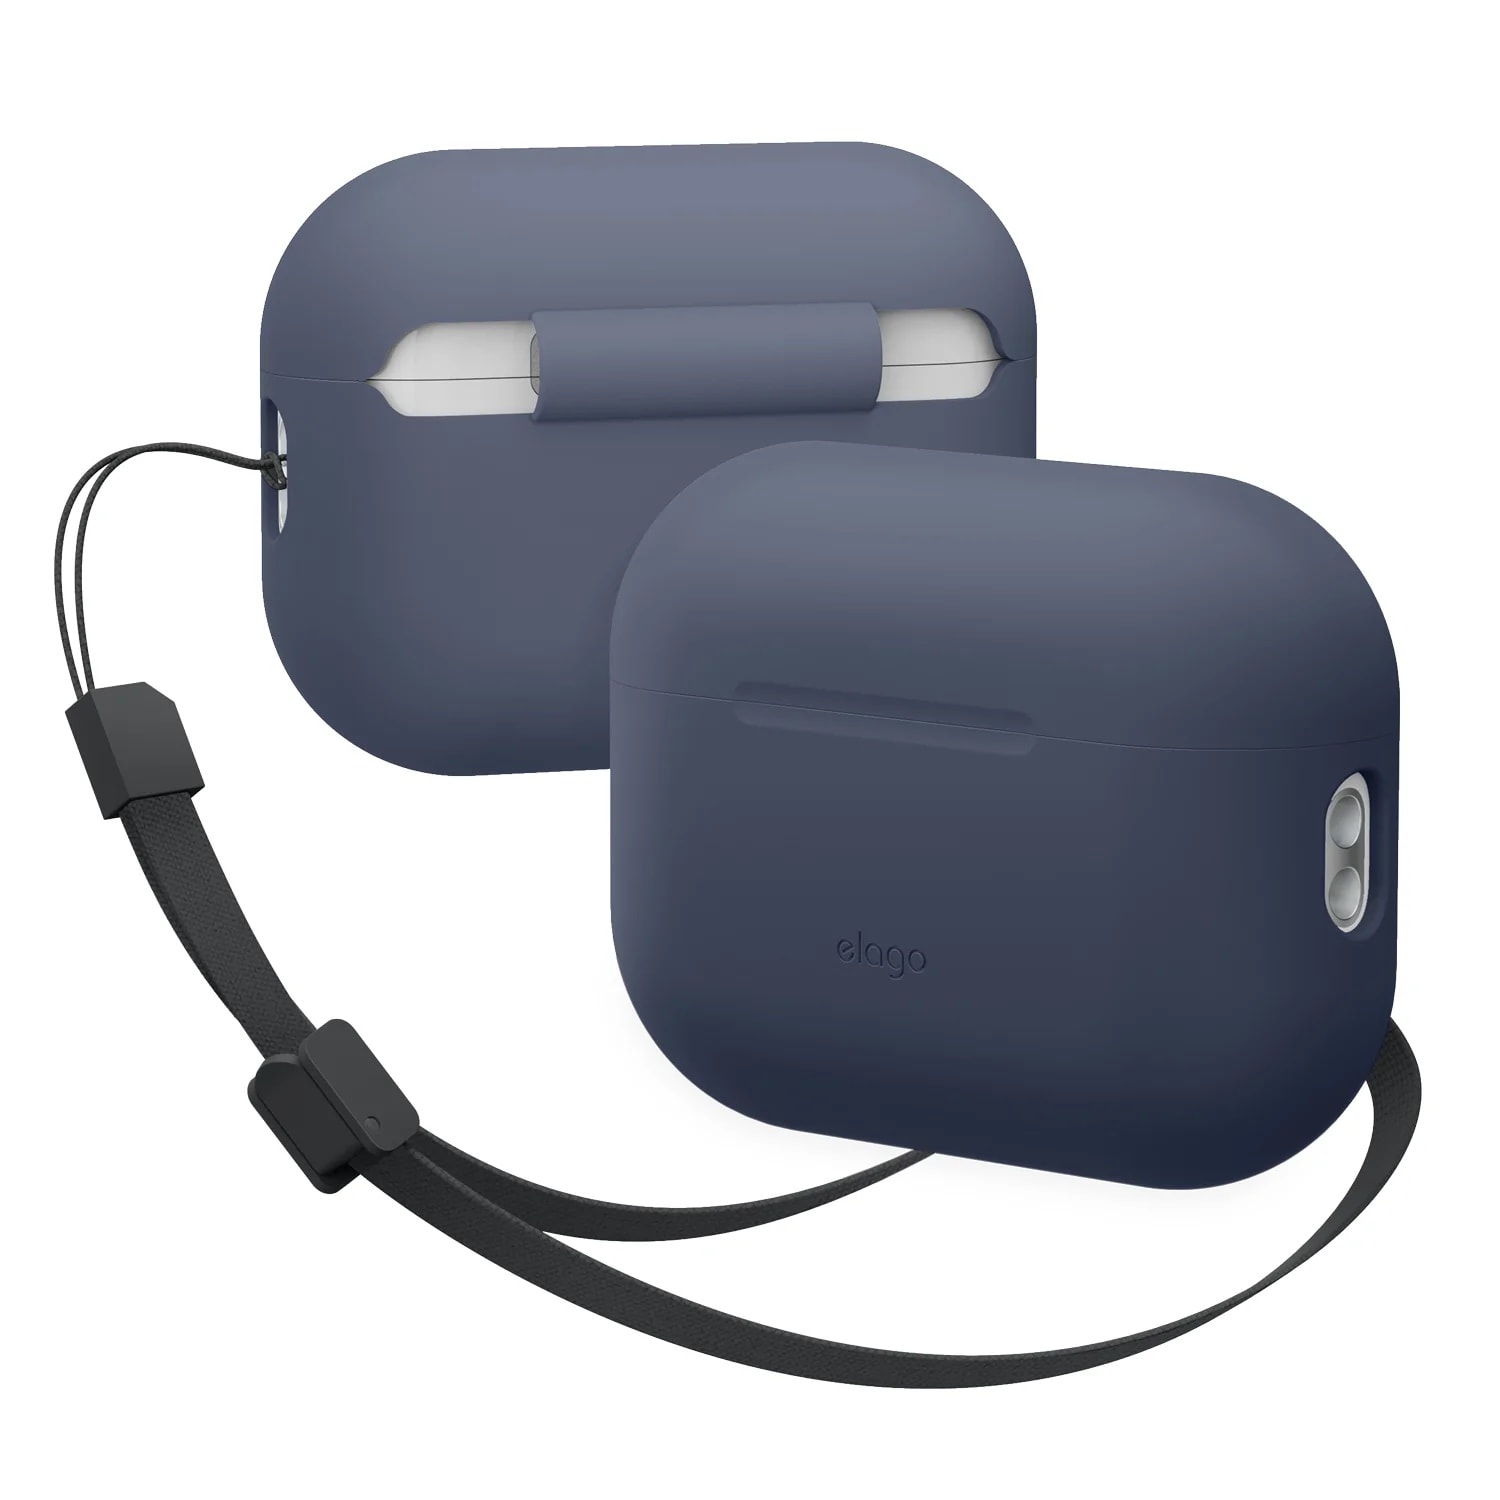 Elago's silicone case and strap help protect AirPods Pro 2 from loss or damage.